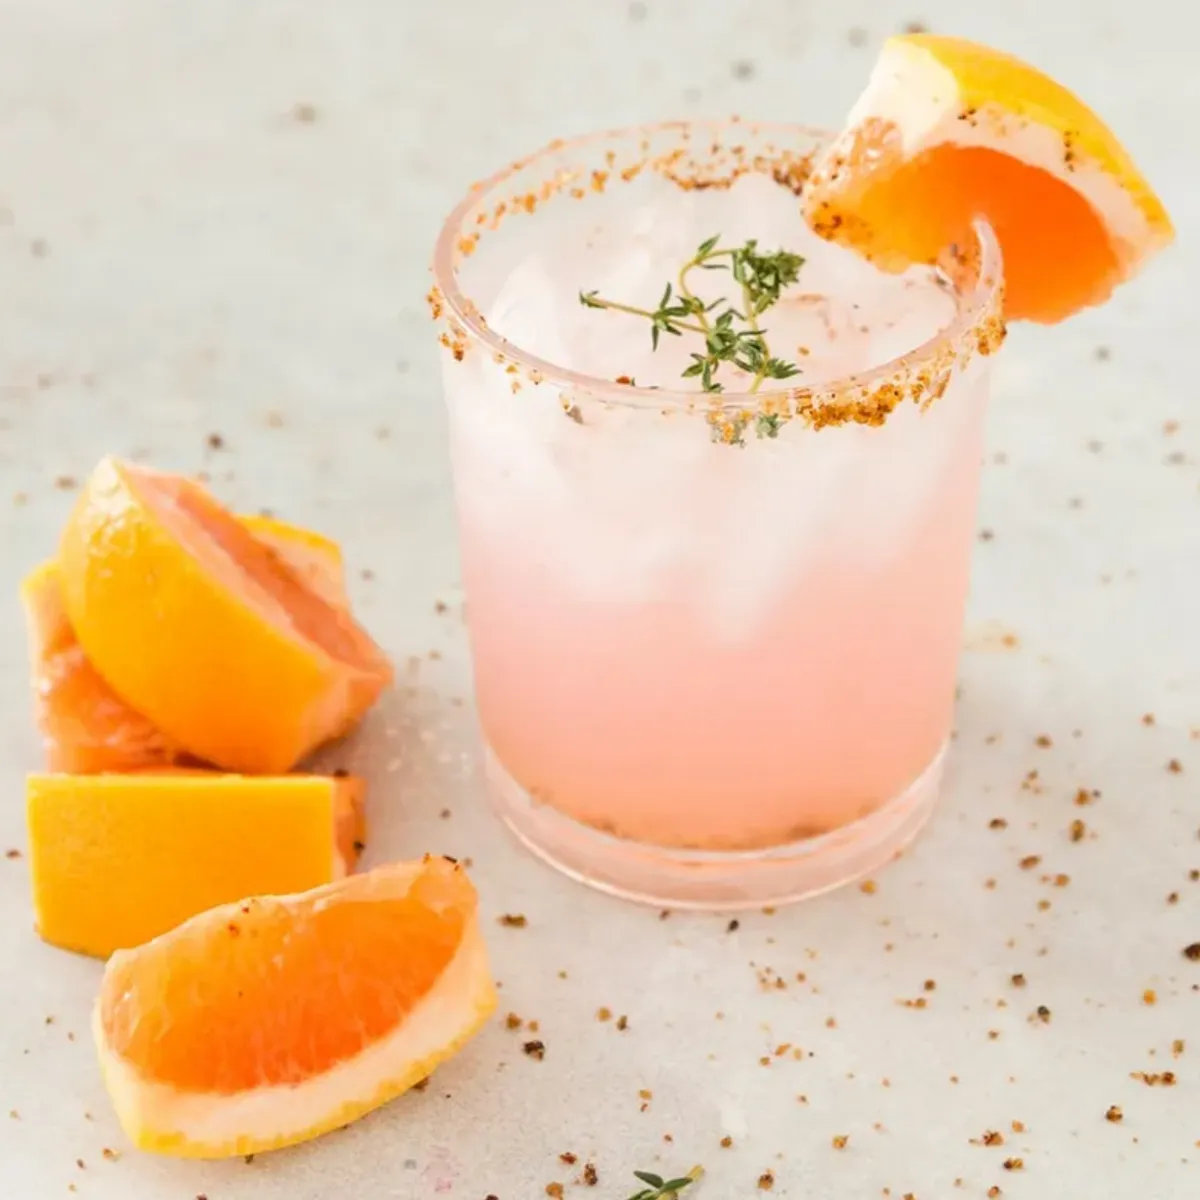 Looking for some tasty and colorful cocktail inspiration? Look no further than our round-up of the 10 most delicious pink cocktails! From refreshing fruity blends to classic favorites, there's something for every taste in this list. So why not mix things up and try one of these pretty pink drinks at your next gathering?